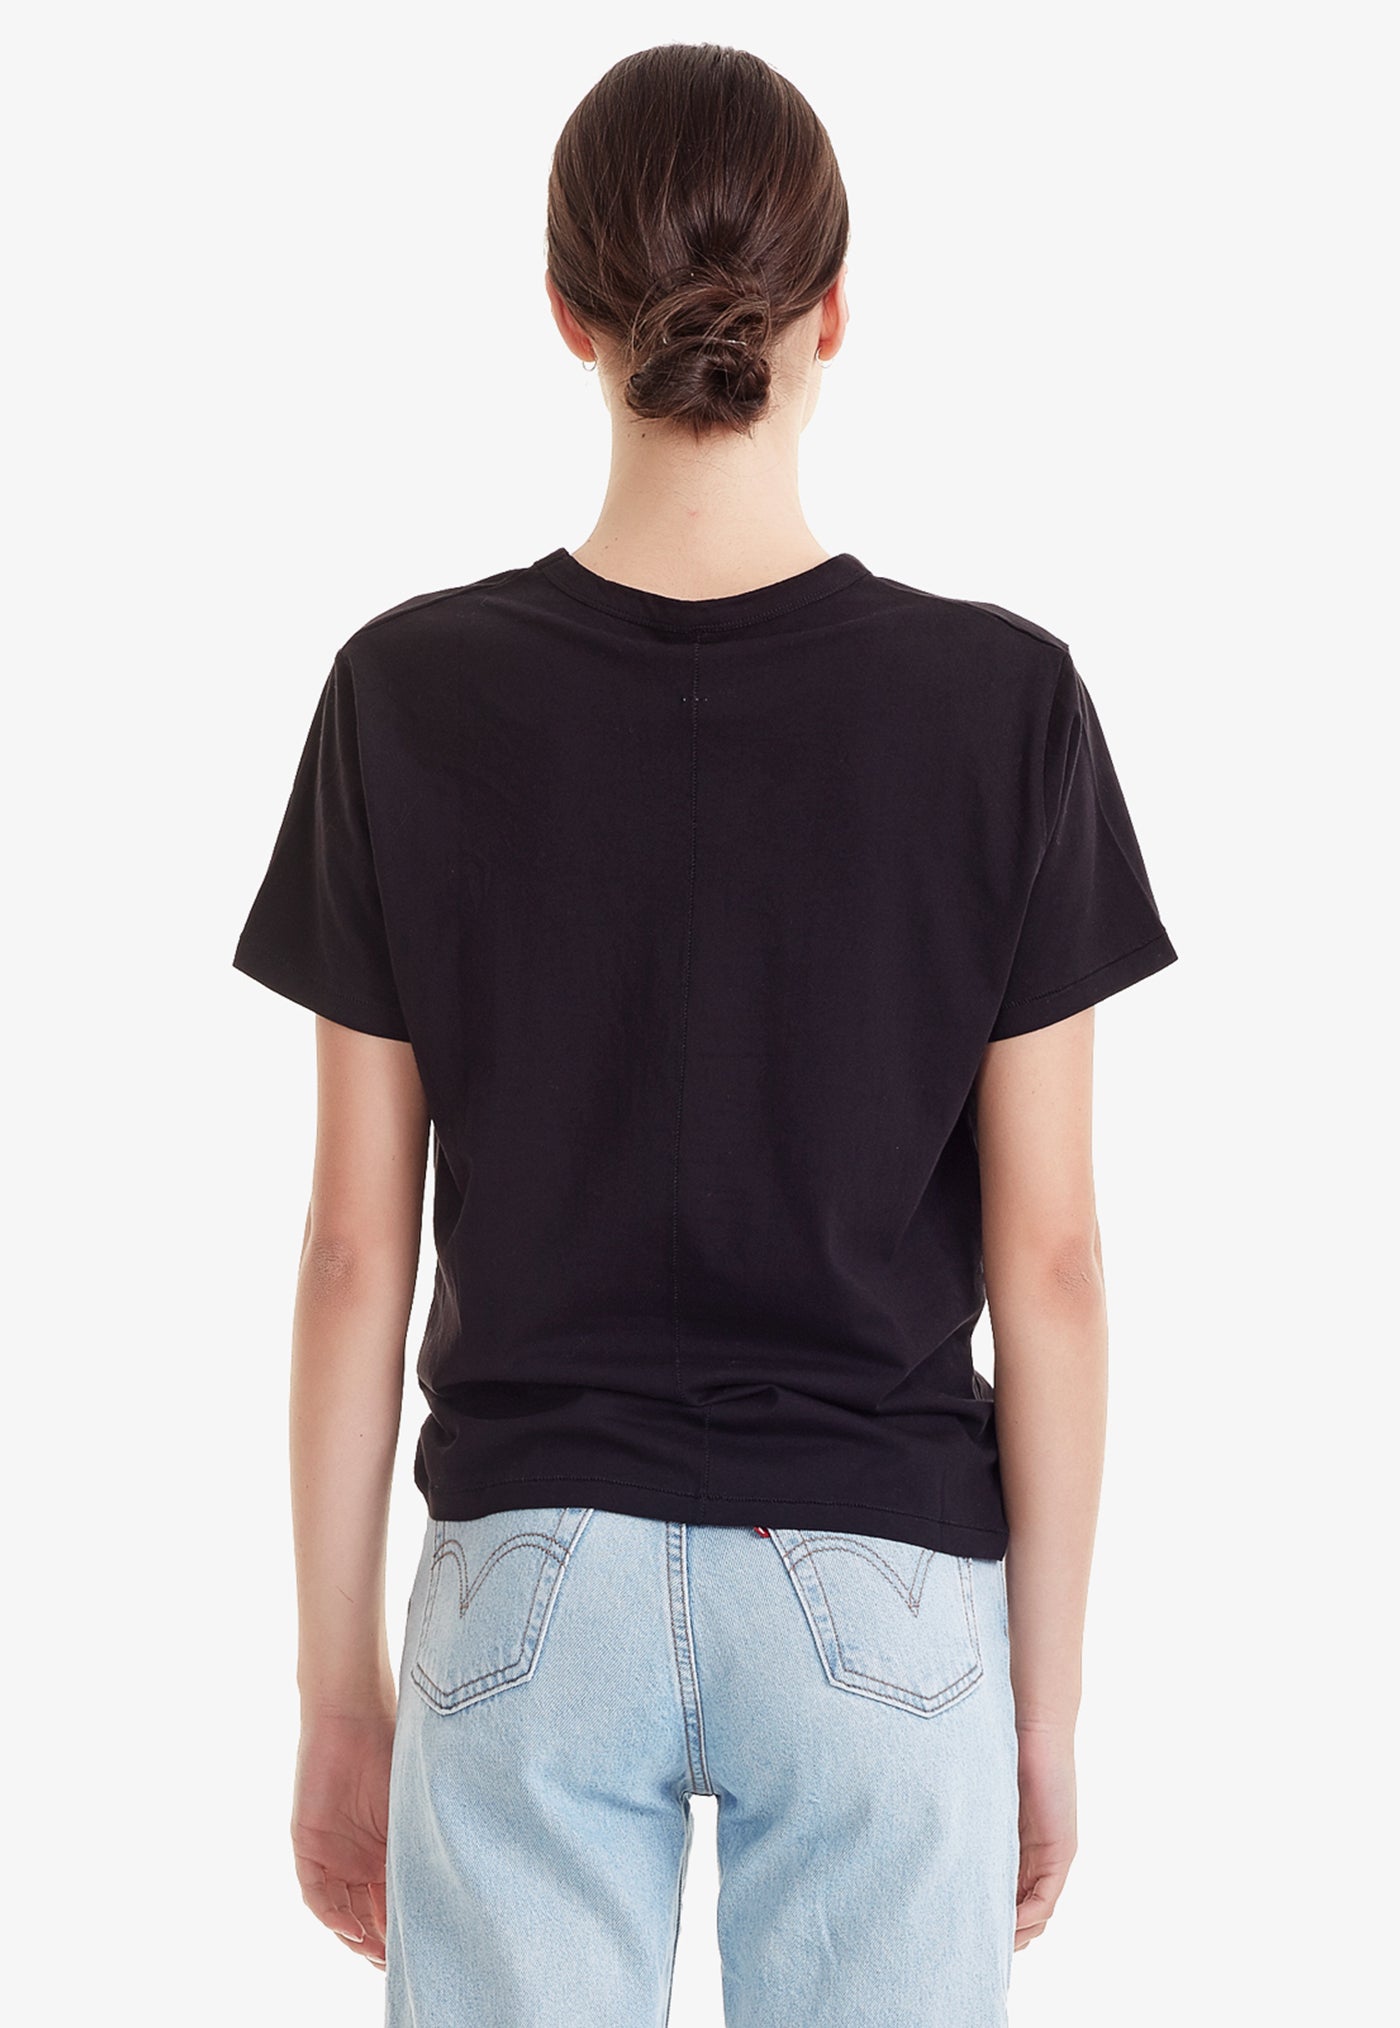 Commoners - Organic Cotton Classic Tee - Black sold by Angel Divine